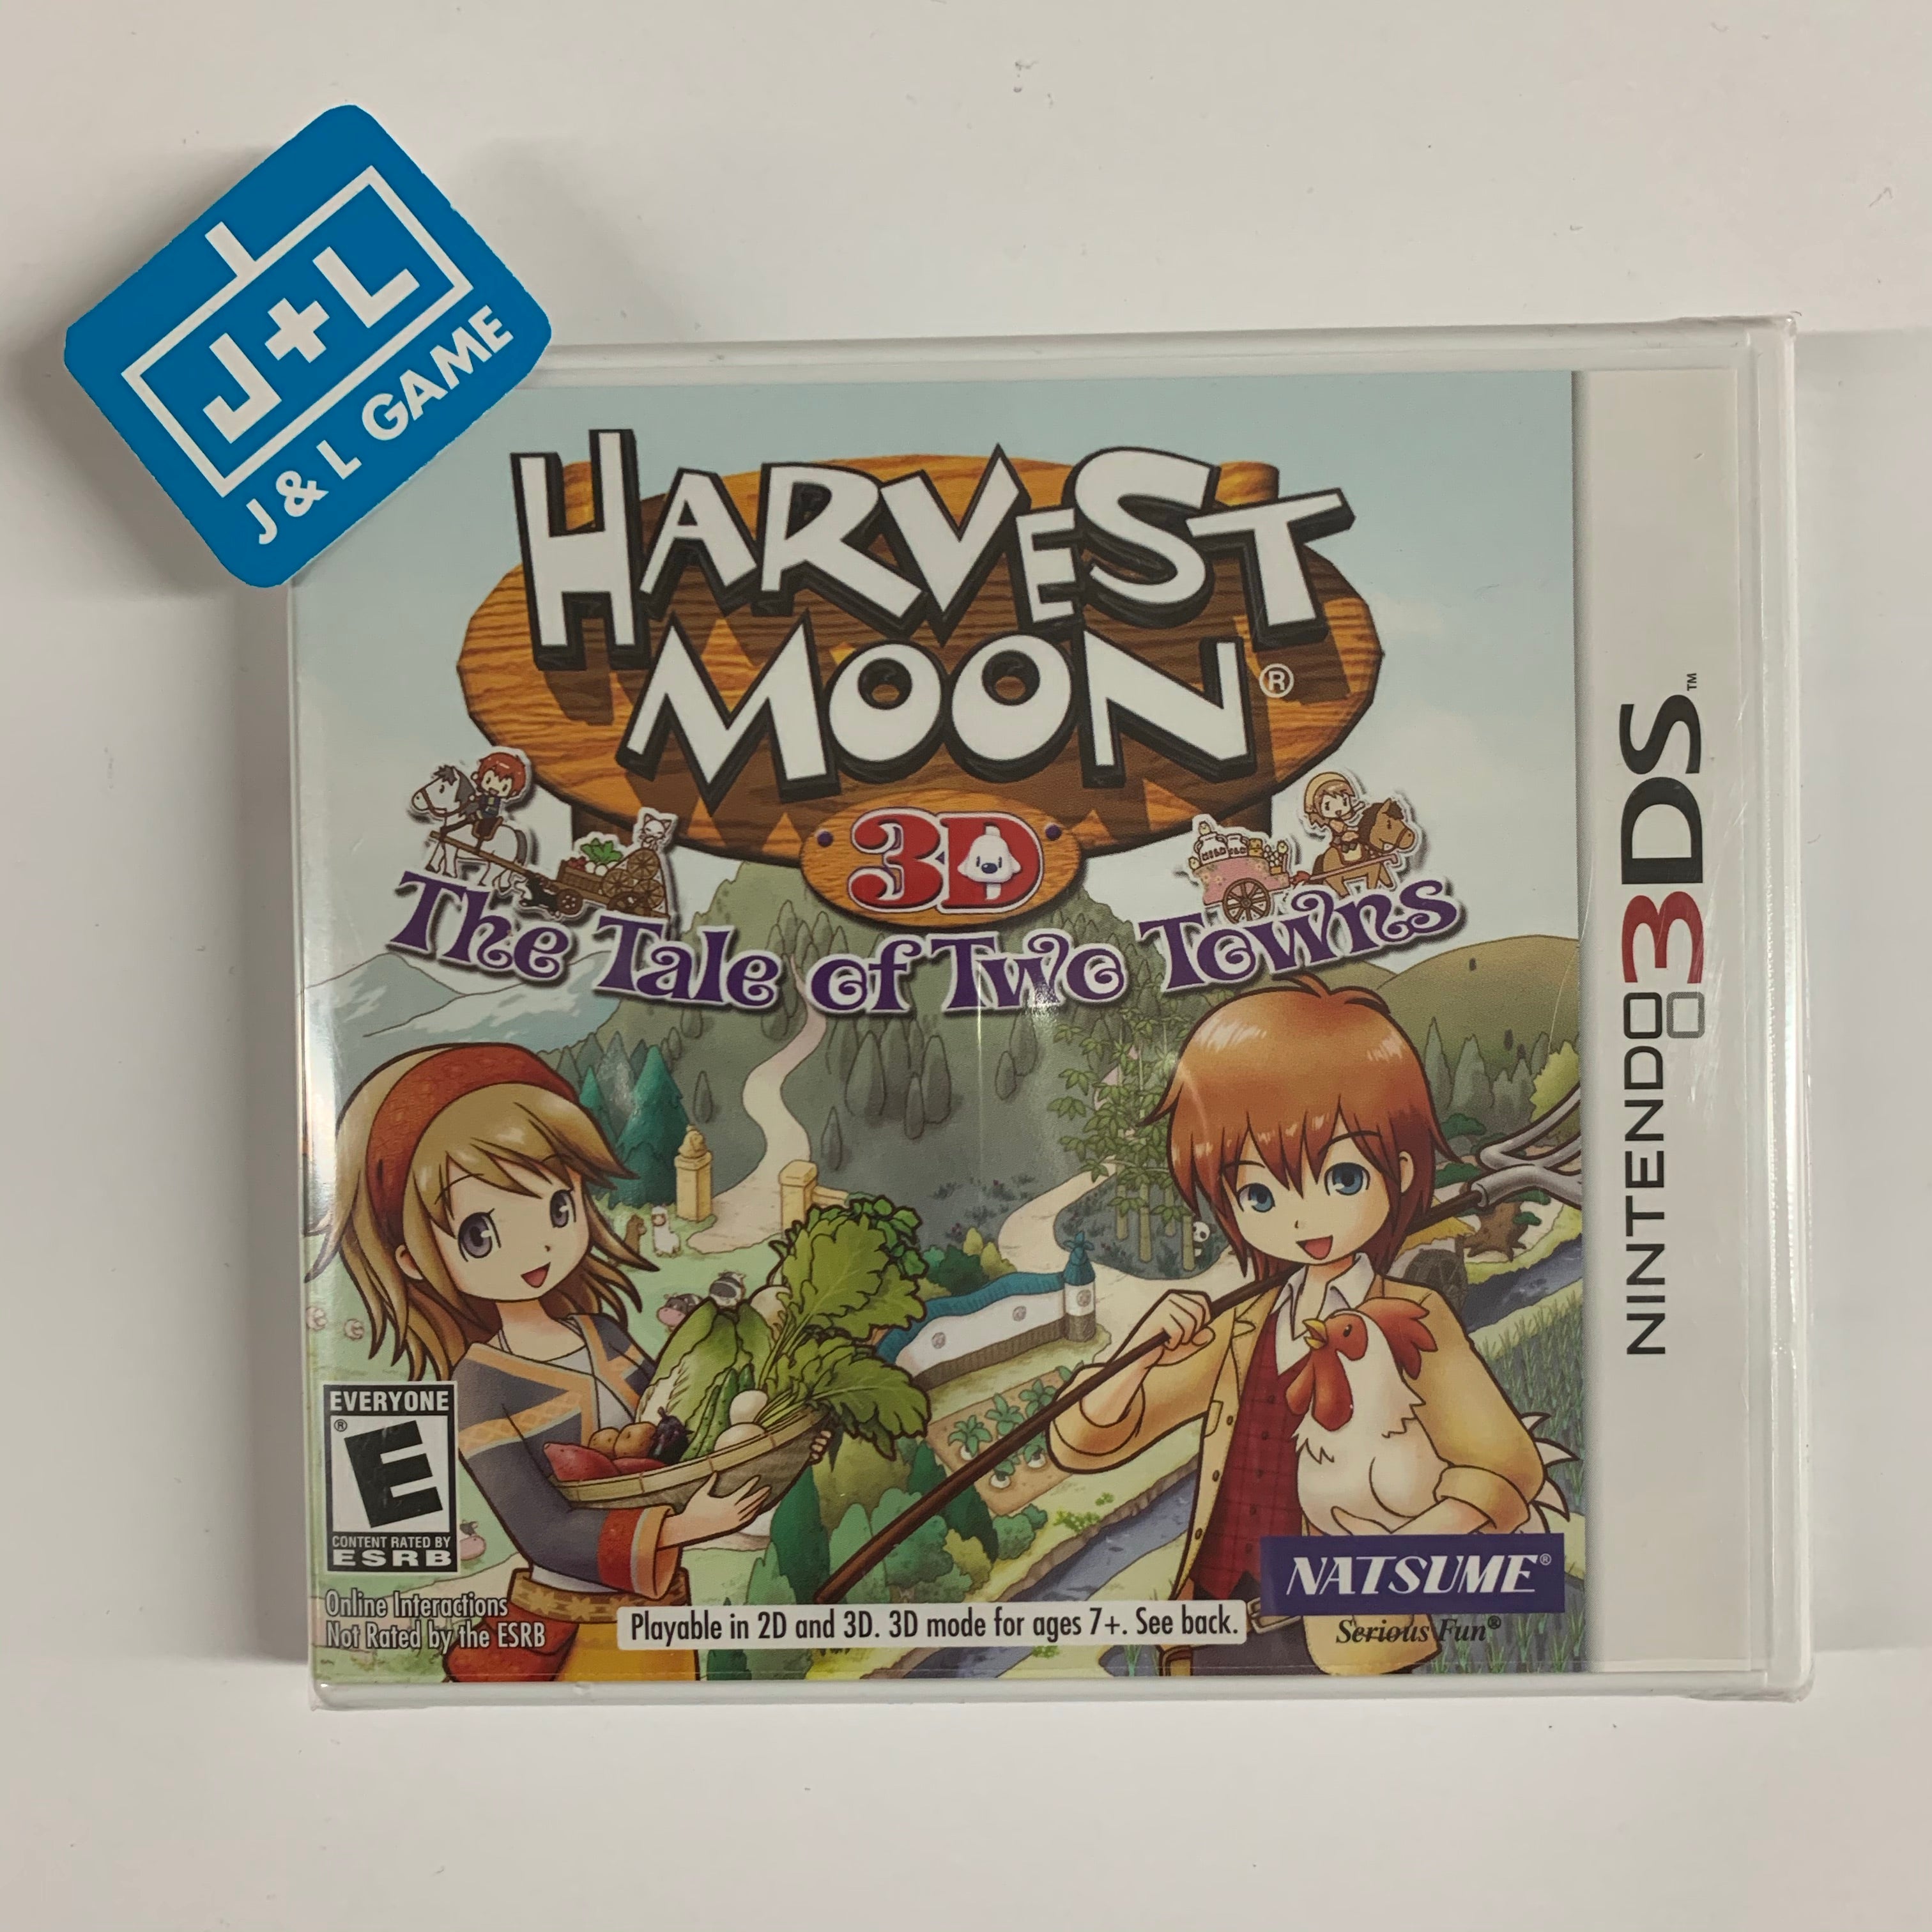 Harvest Moon 3D: The Tale of Two Towns - Nintendo 3DS Video Games Natsume   